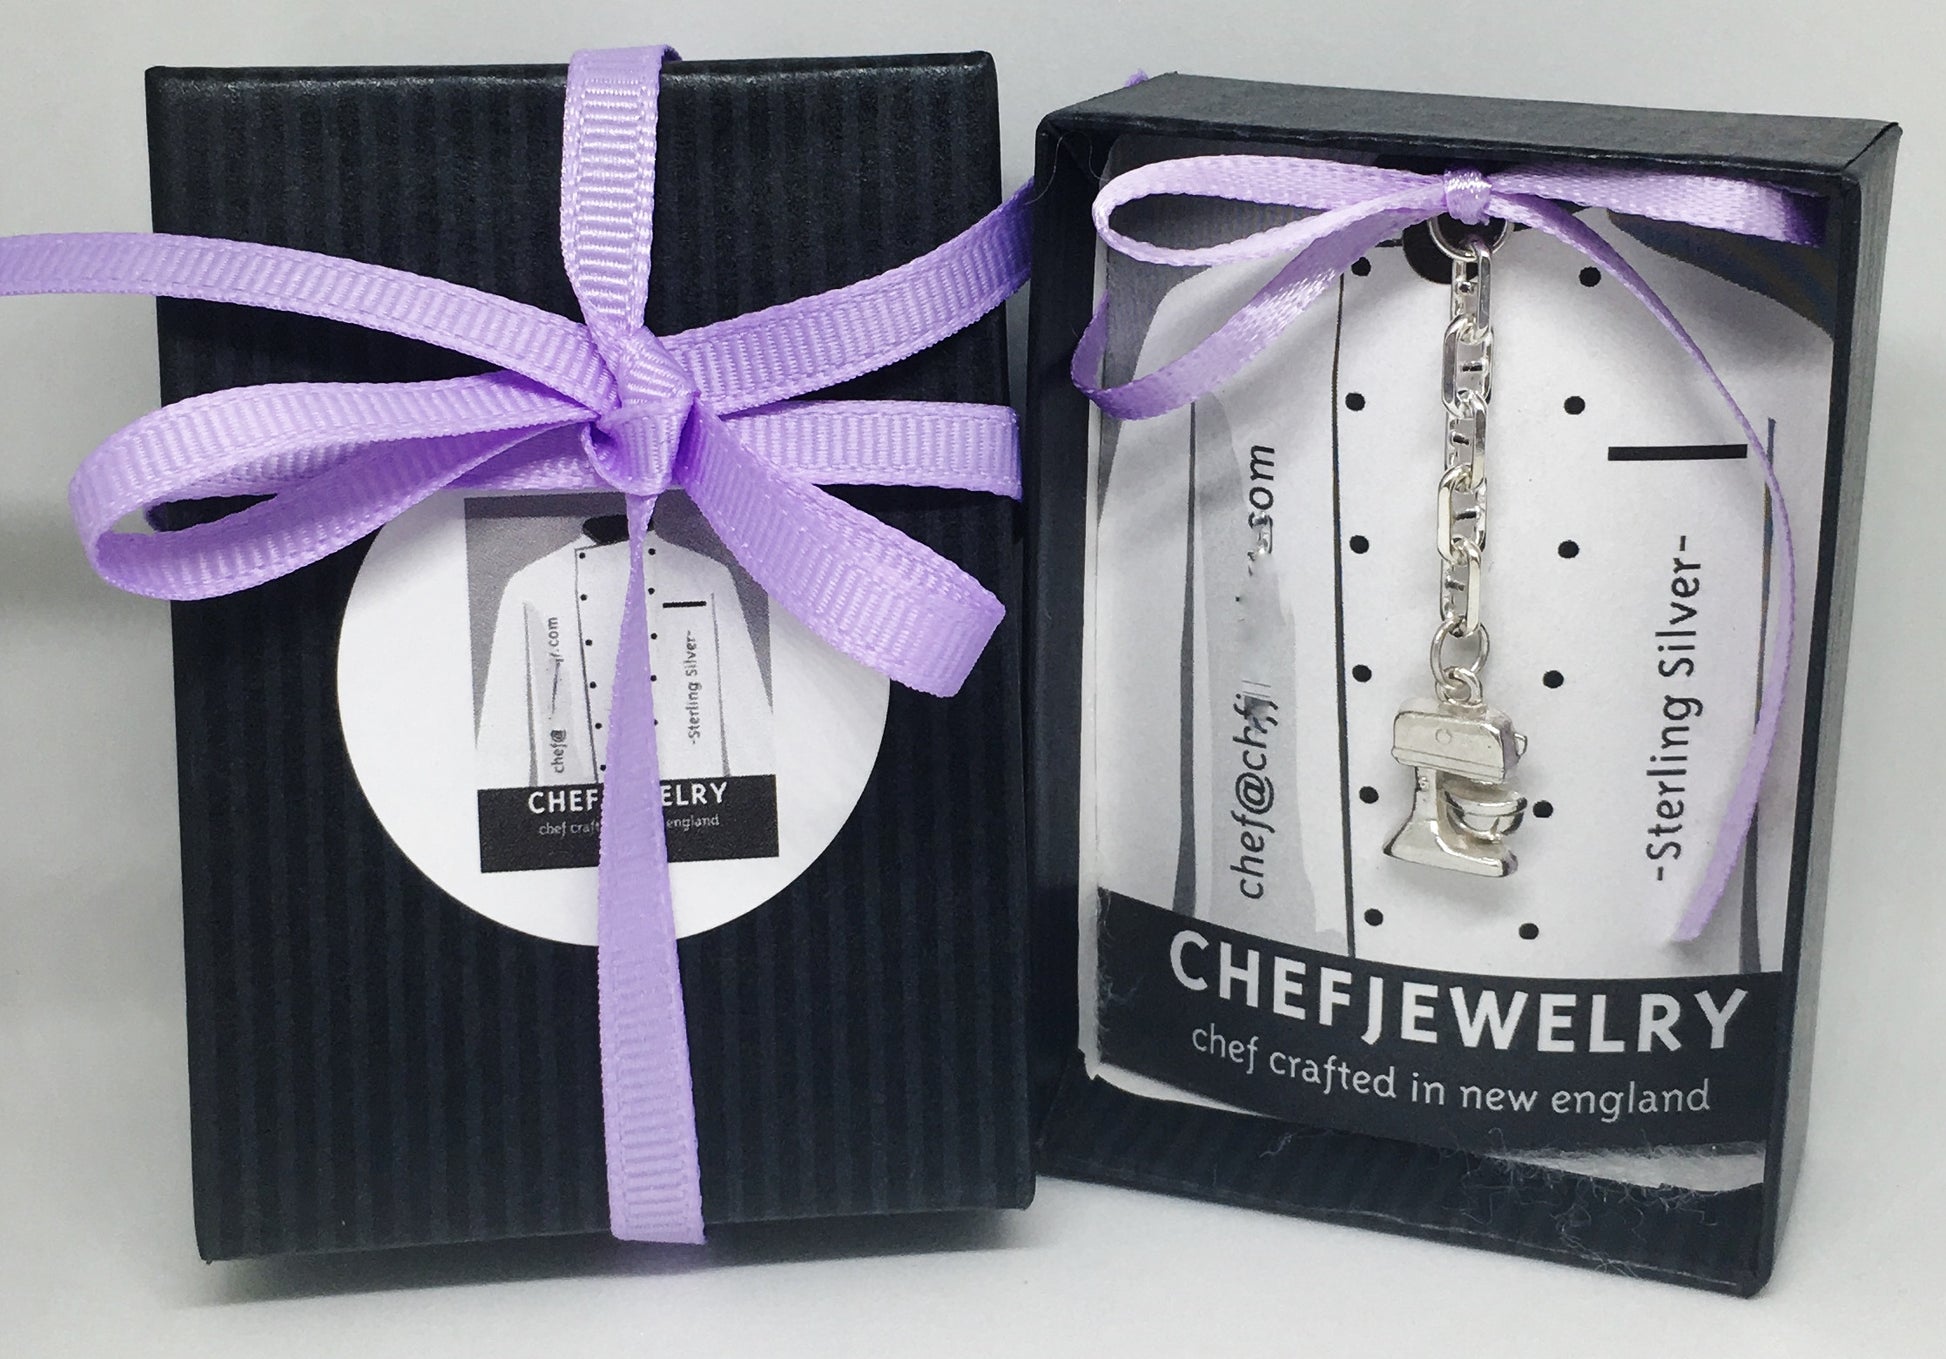 Your chef pin will arrive in custom ChefJewelry packaging